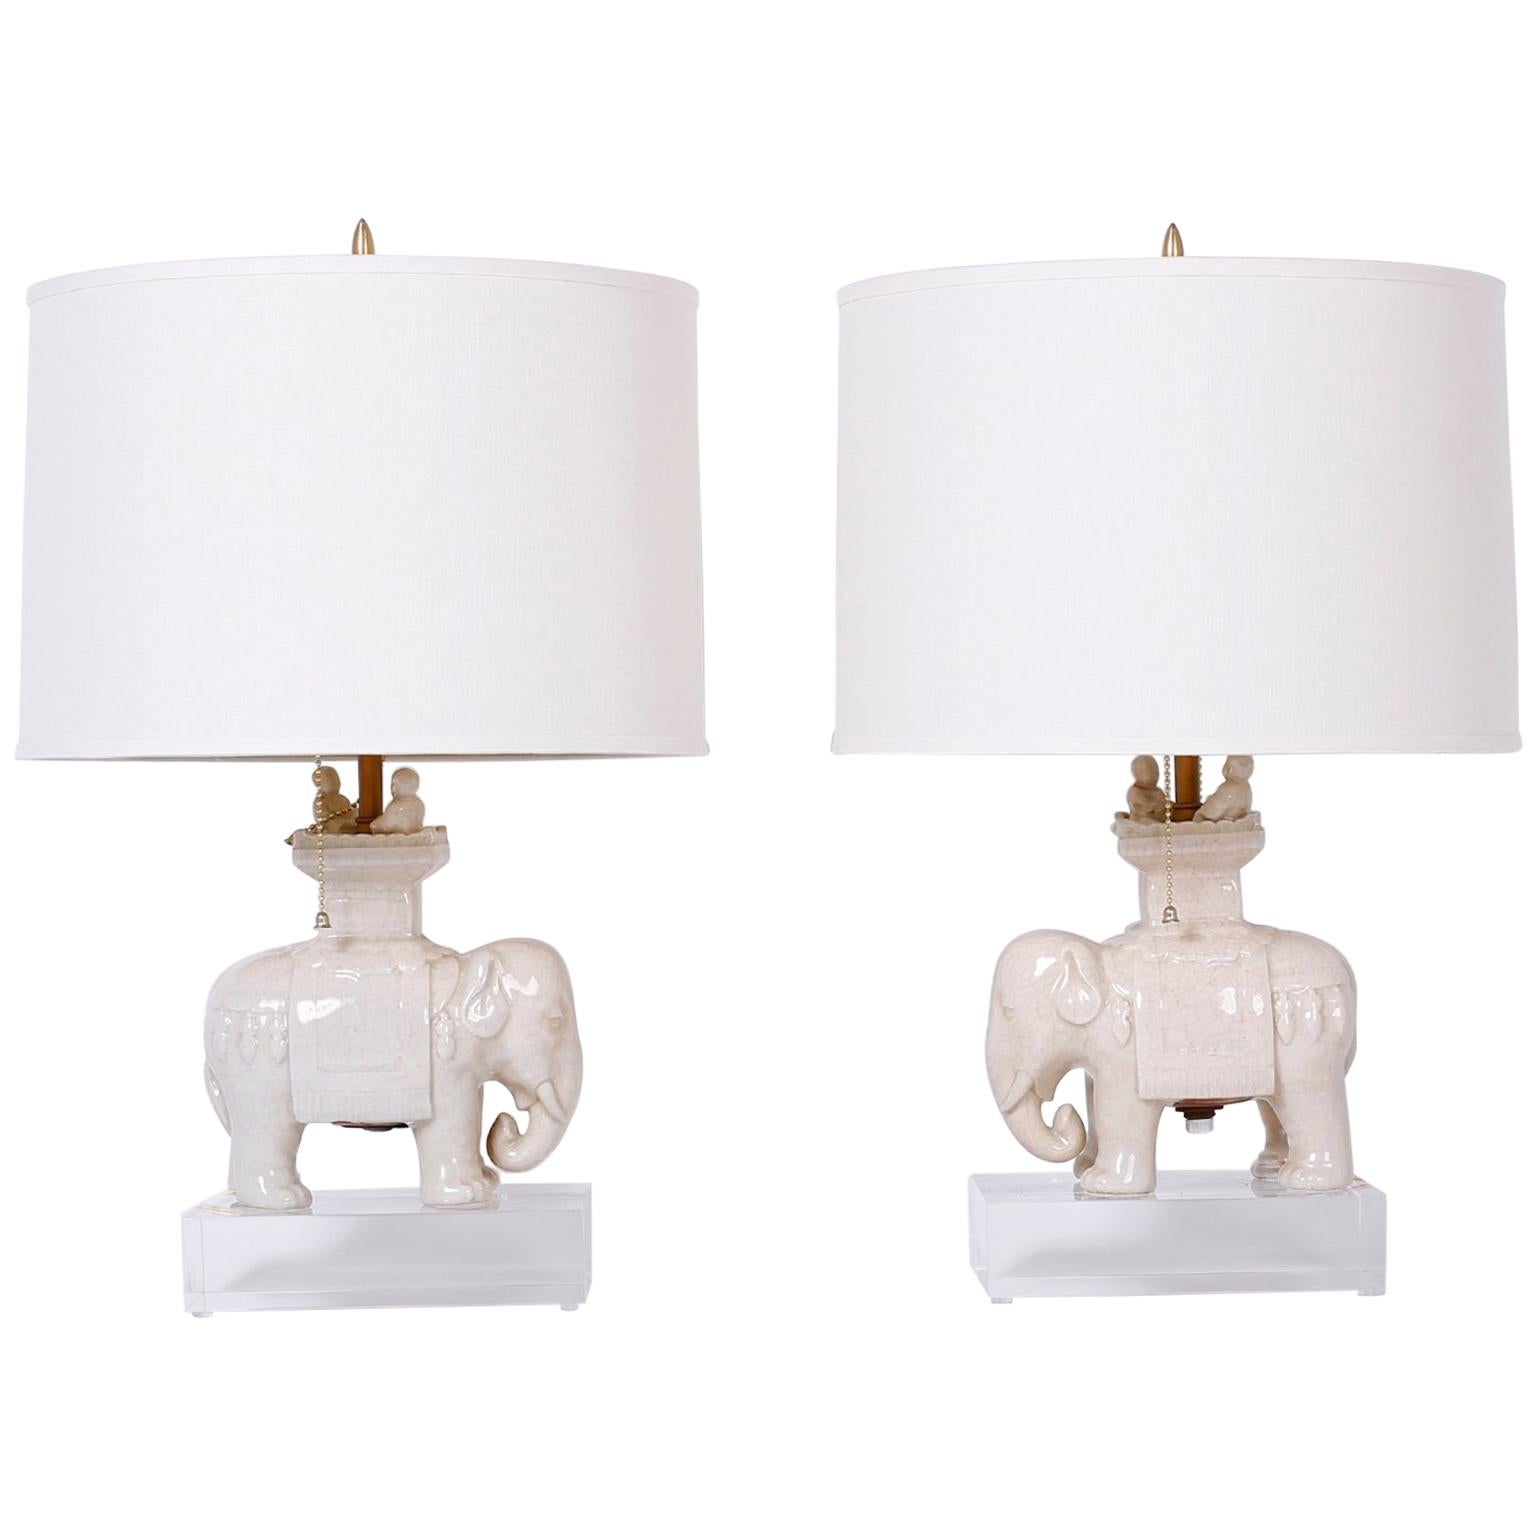 Pair of Midcentury Porcelain Elephant Table Lamps